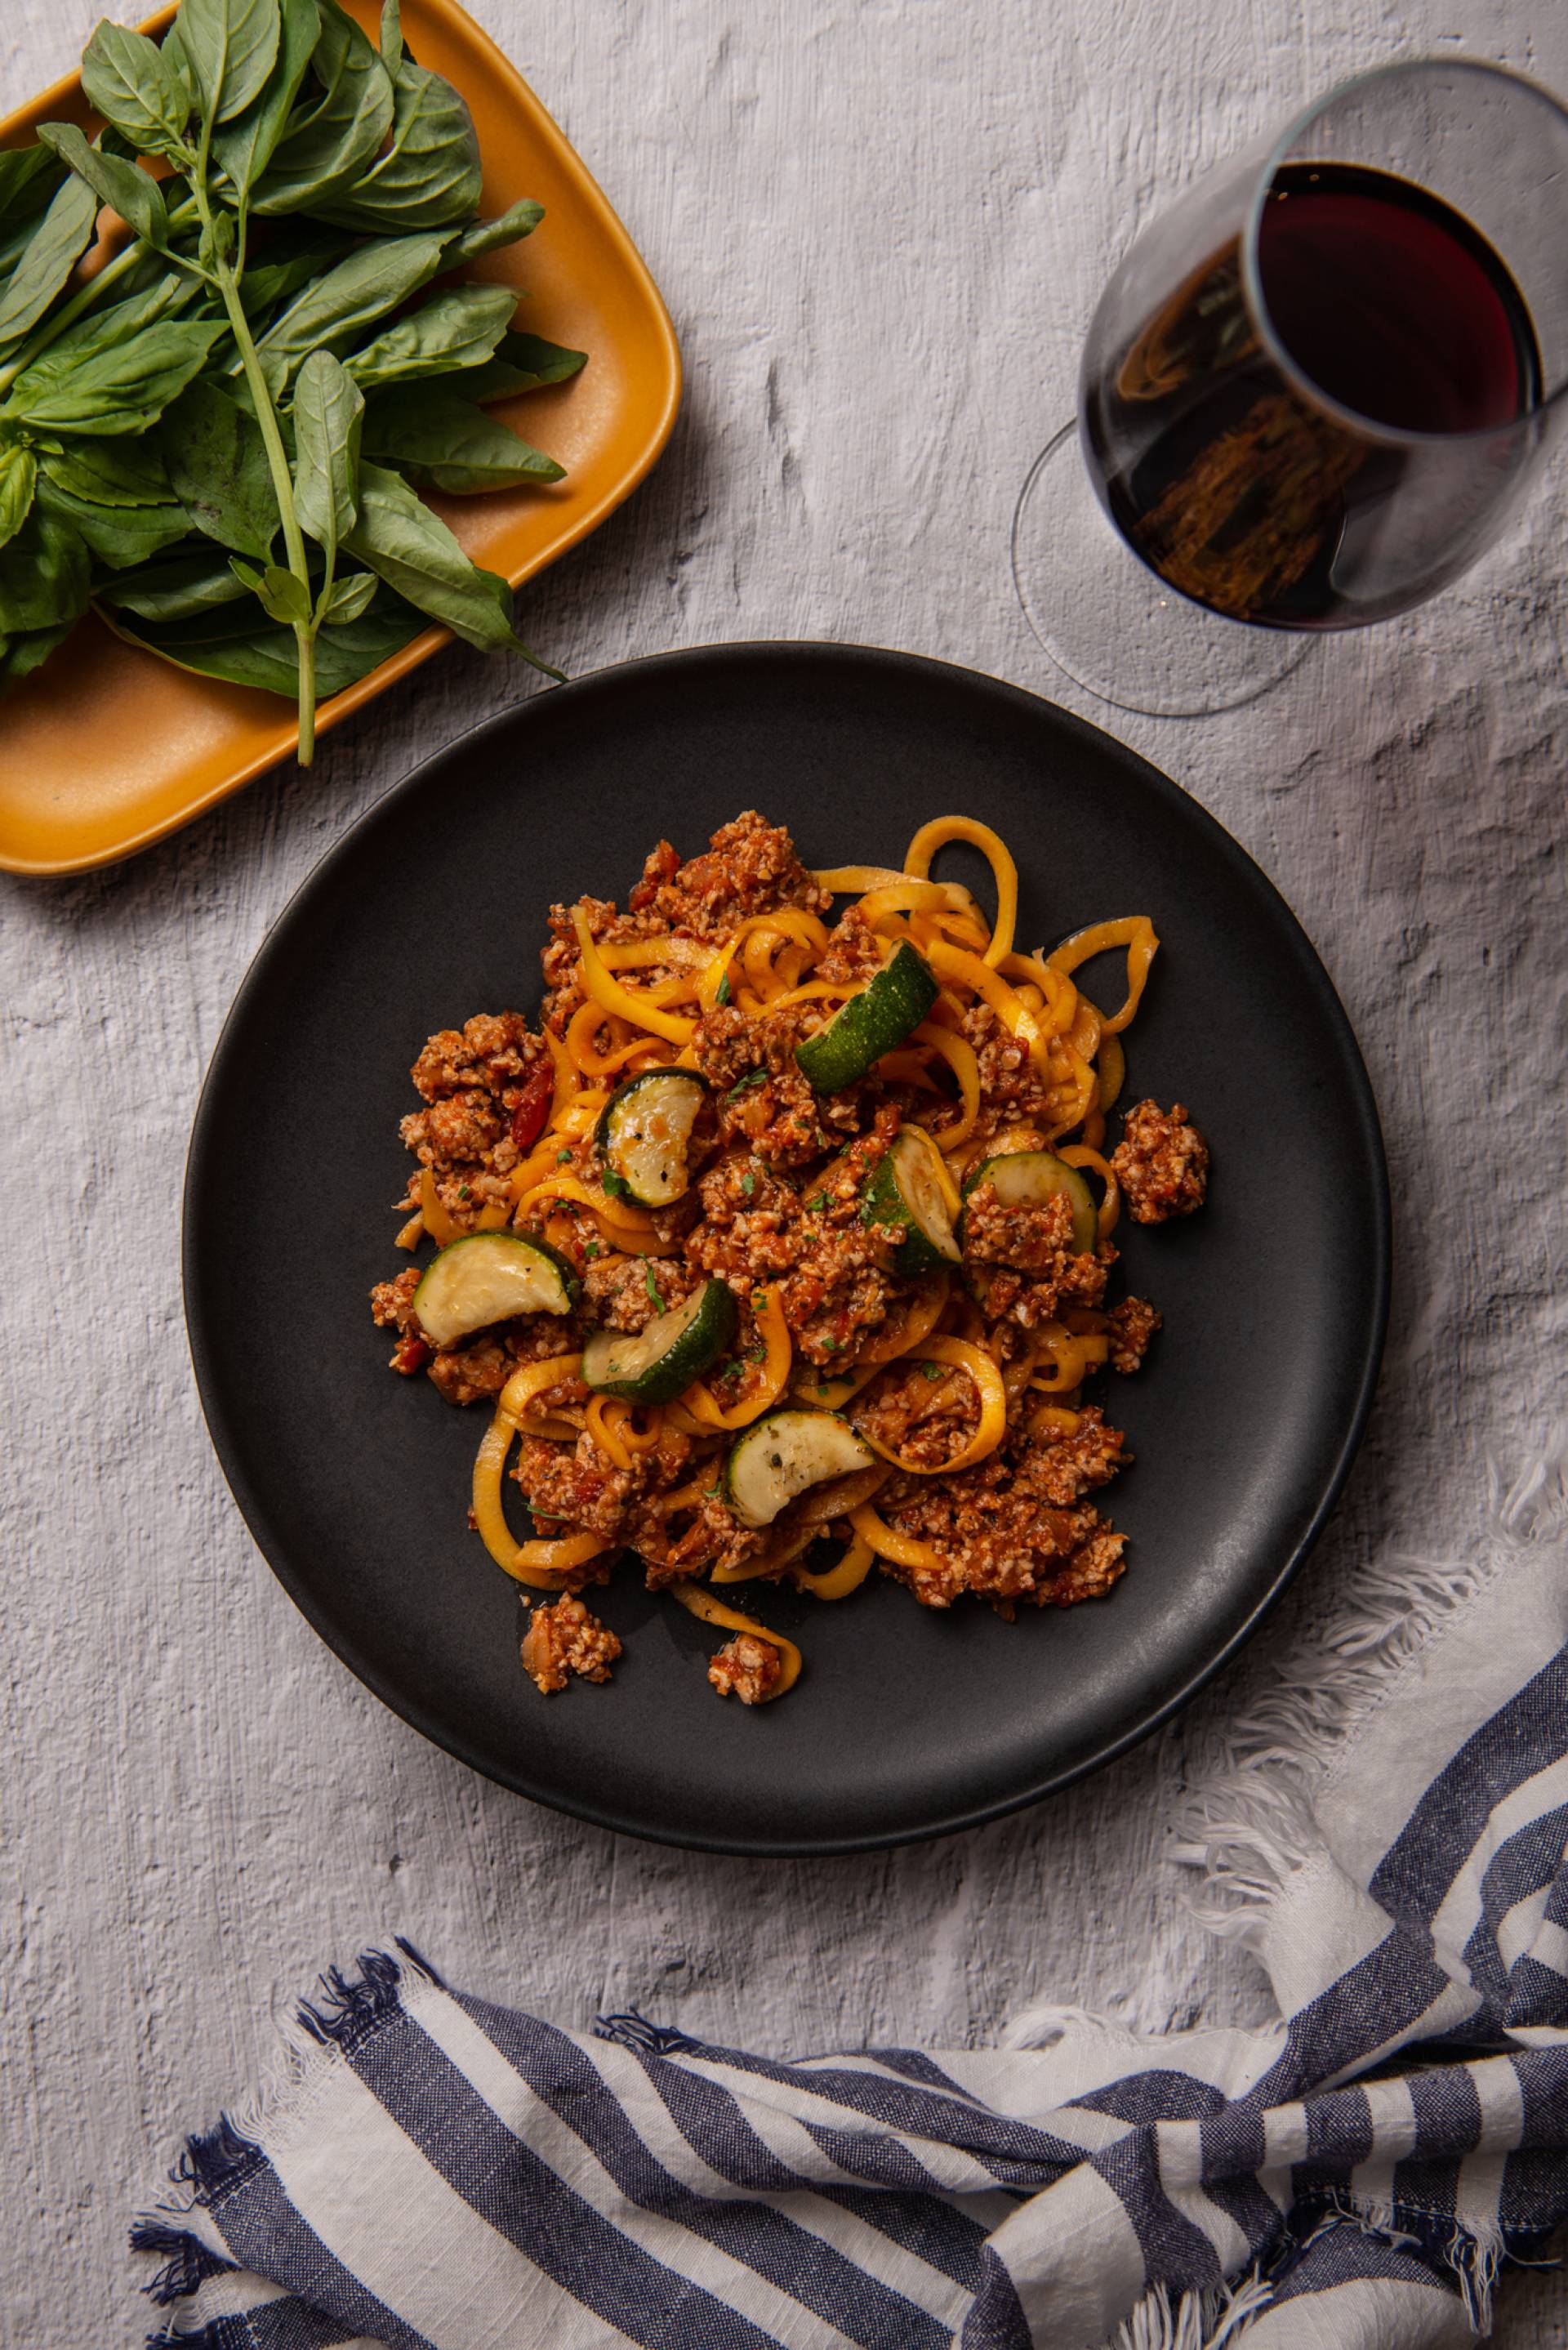 FITNESS: Turkey Bolognese (LOW CARB)